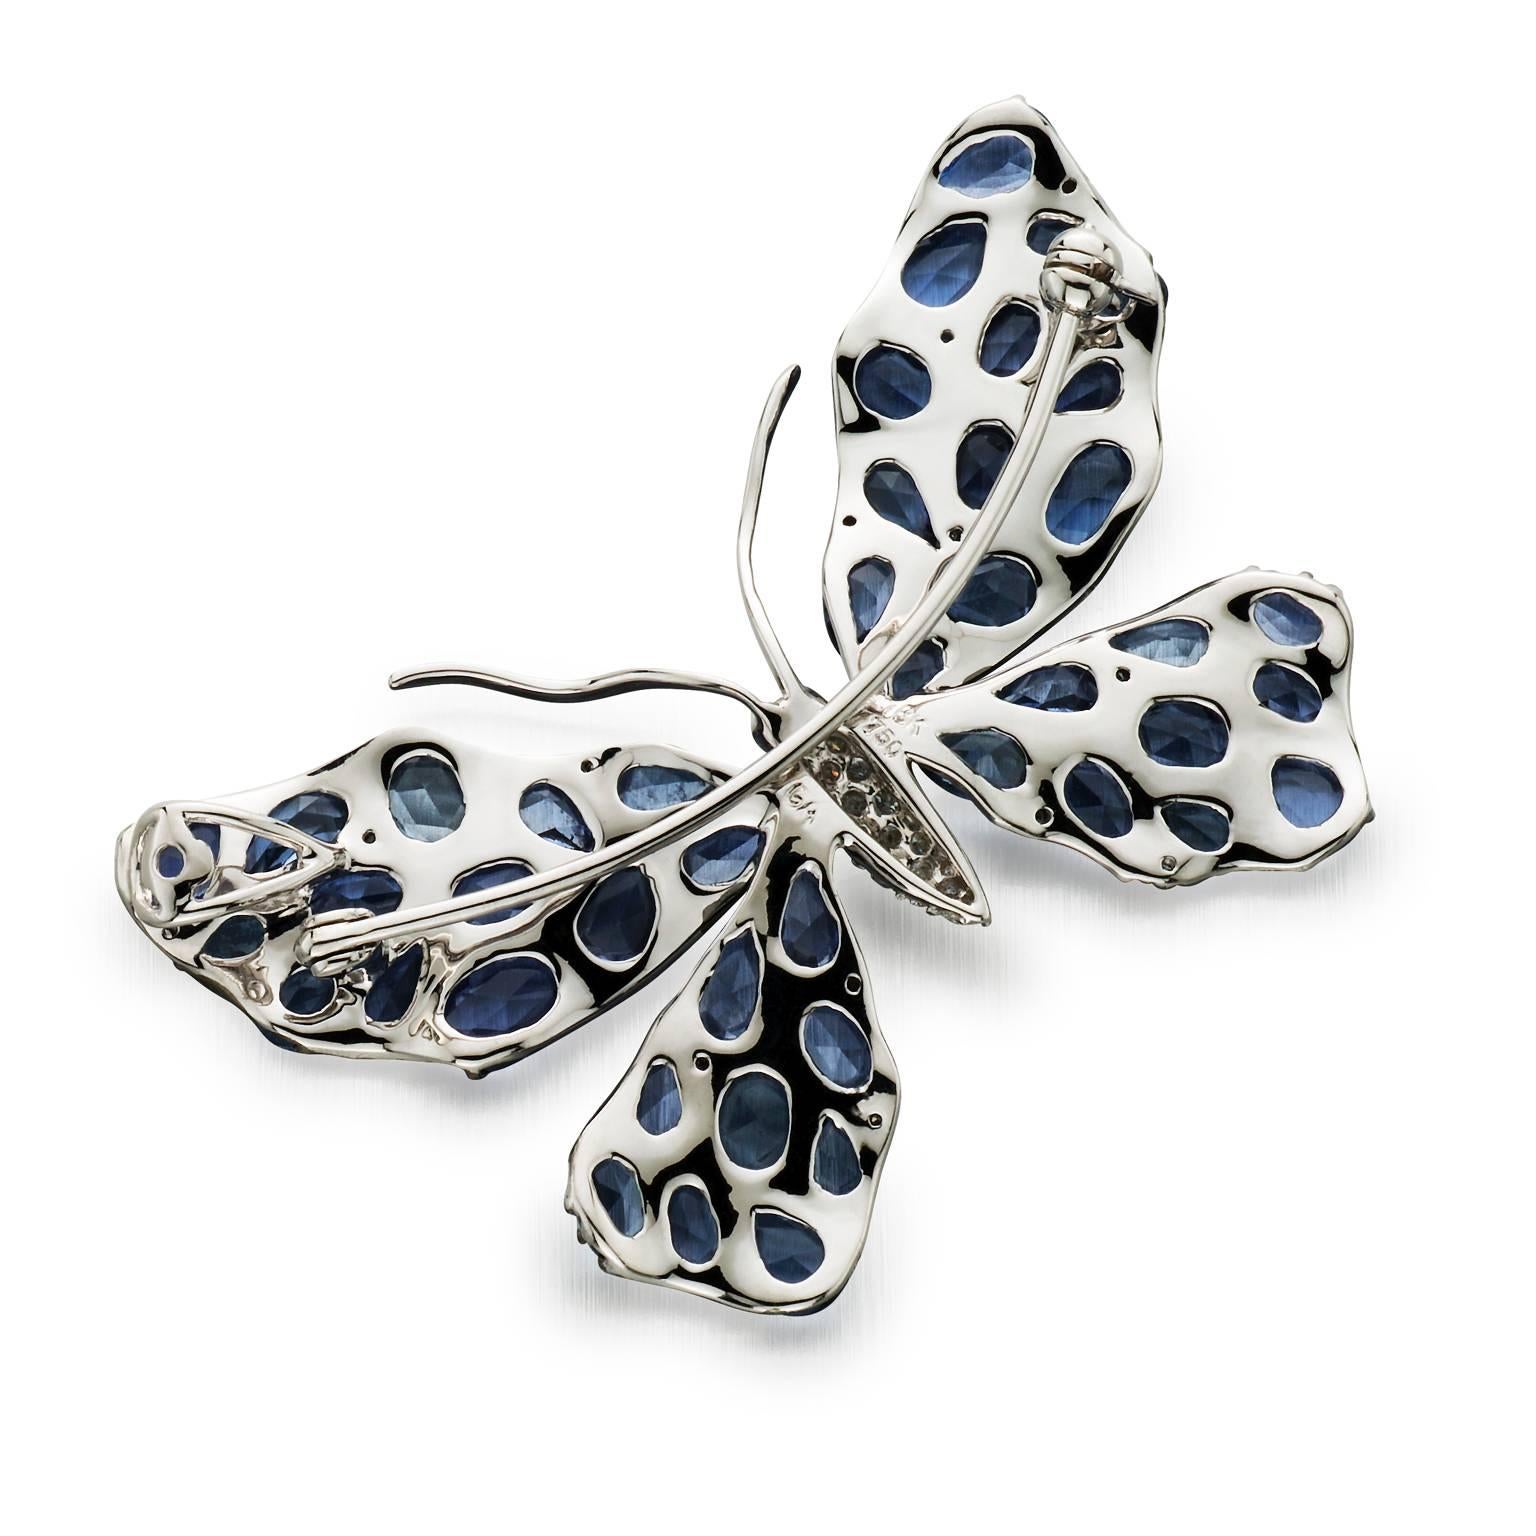 A delightful little creature to accent your lapel. Stylized 18k white gold butterfly brooch / Pendant is almost entirely set with 11.48 cttw of various sizes and shapes of blue rose cut sapphires set in black rhodium. Body is pave set with round